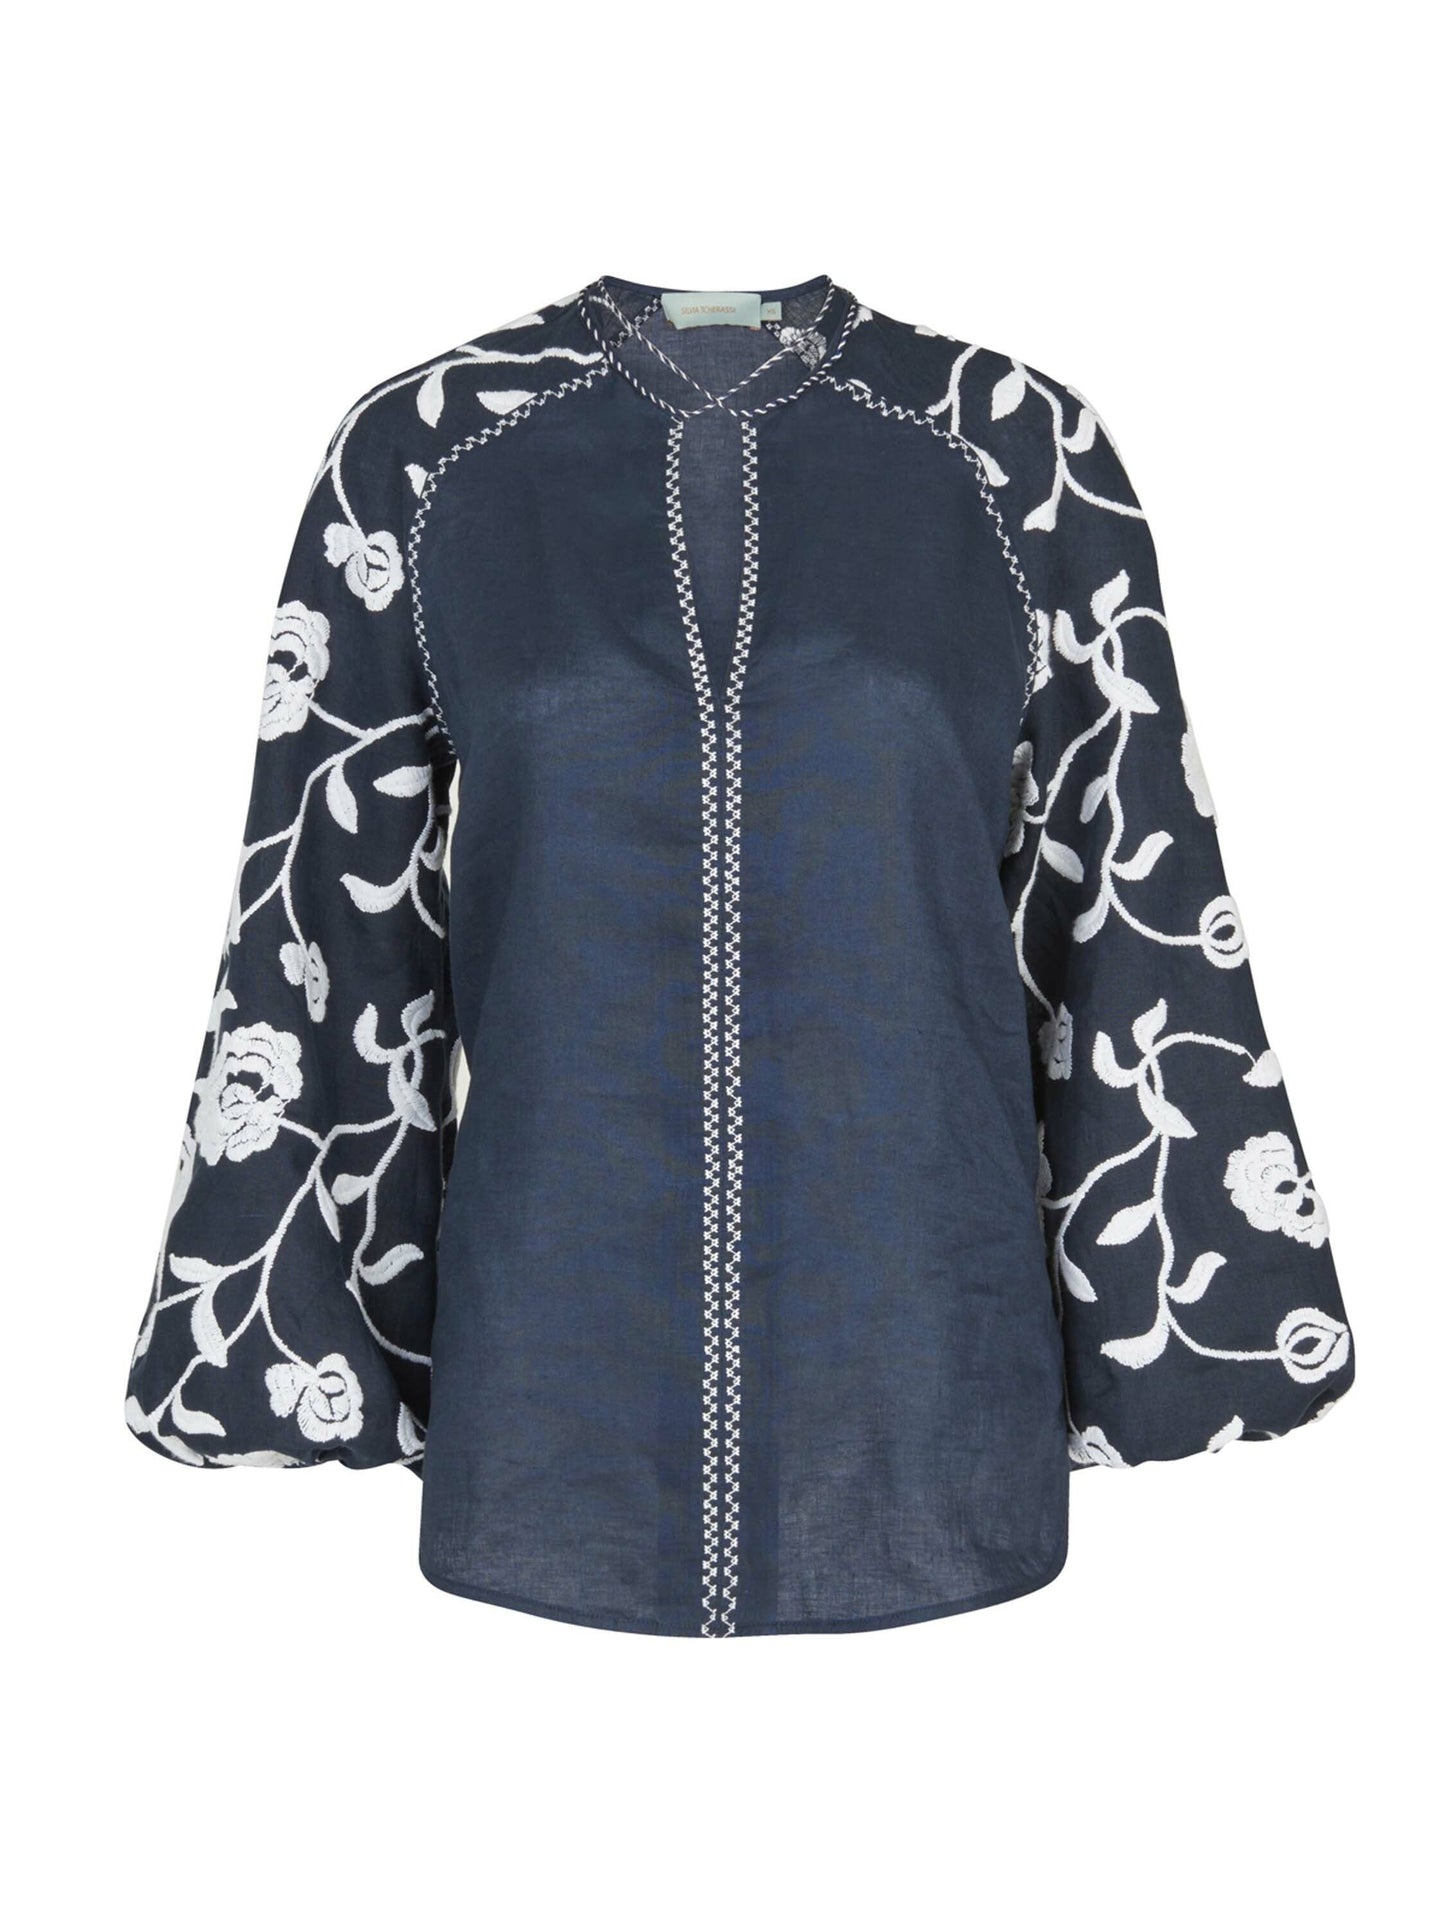 A Molveno Blouse Navy Embroidered with white flowers embroidered on high-fashion sleeves.